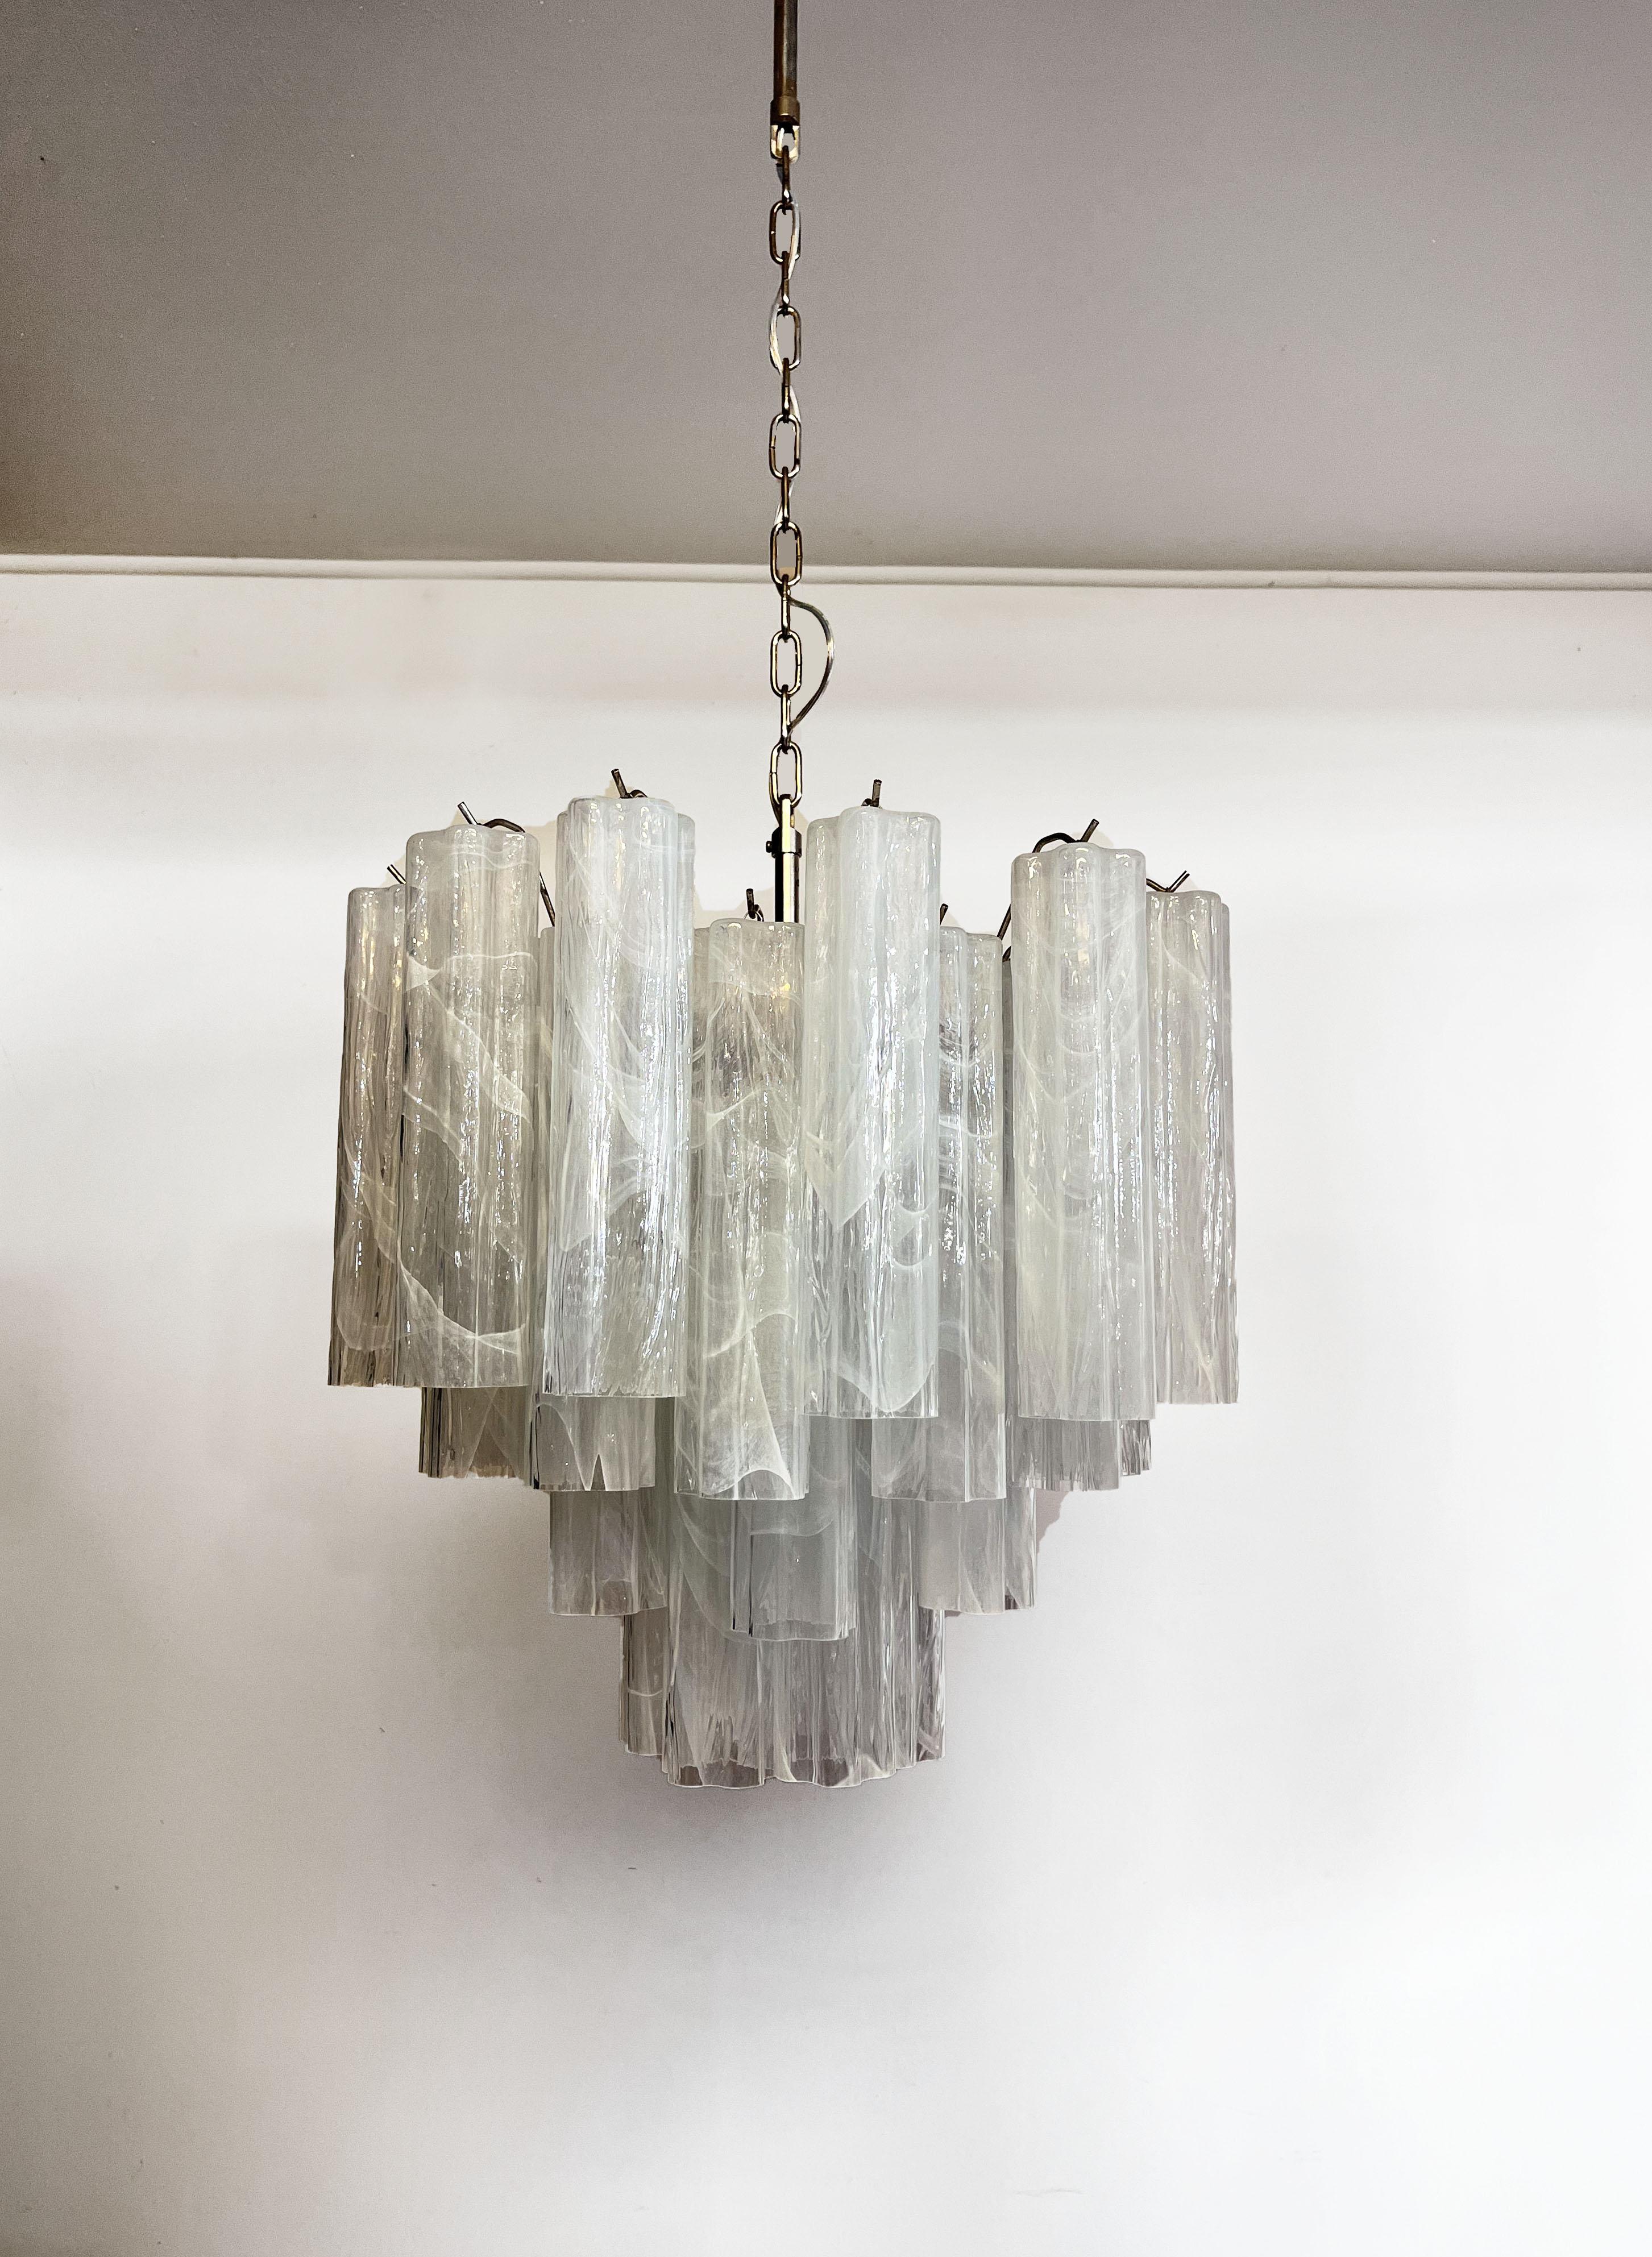 Italian vintage glass chandelier with alabaster white glass tubes. The armor polished nickel supports 36 large glass tubes in a star shape. The alabaster technique created in Venetian glassworks gives the glass an elegant grain.
Period: 	late XX